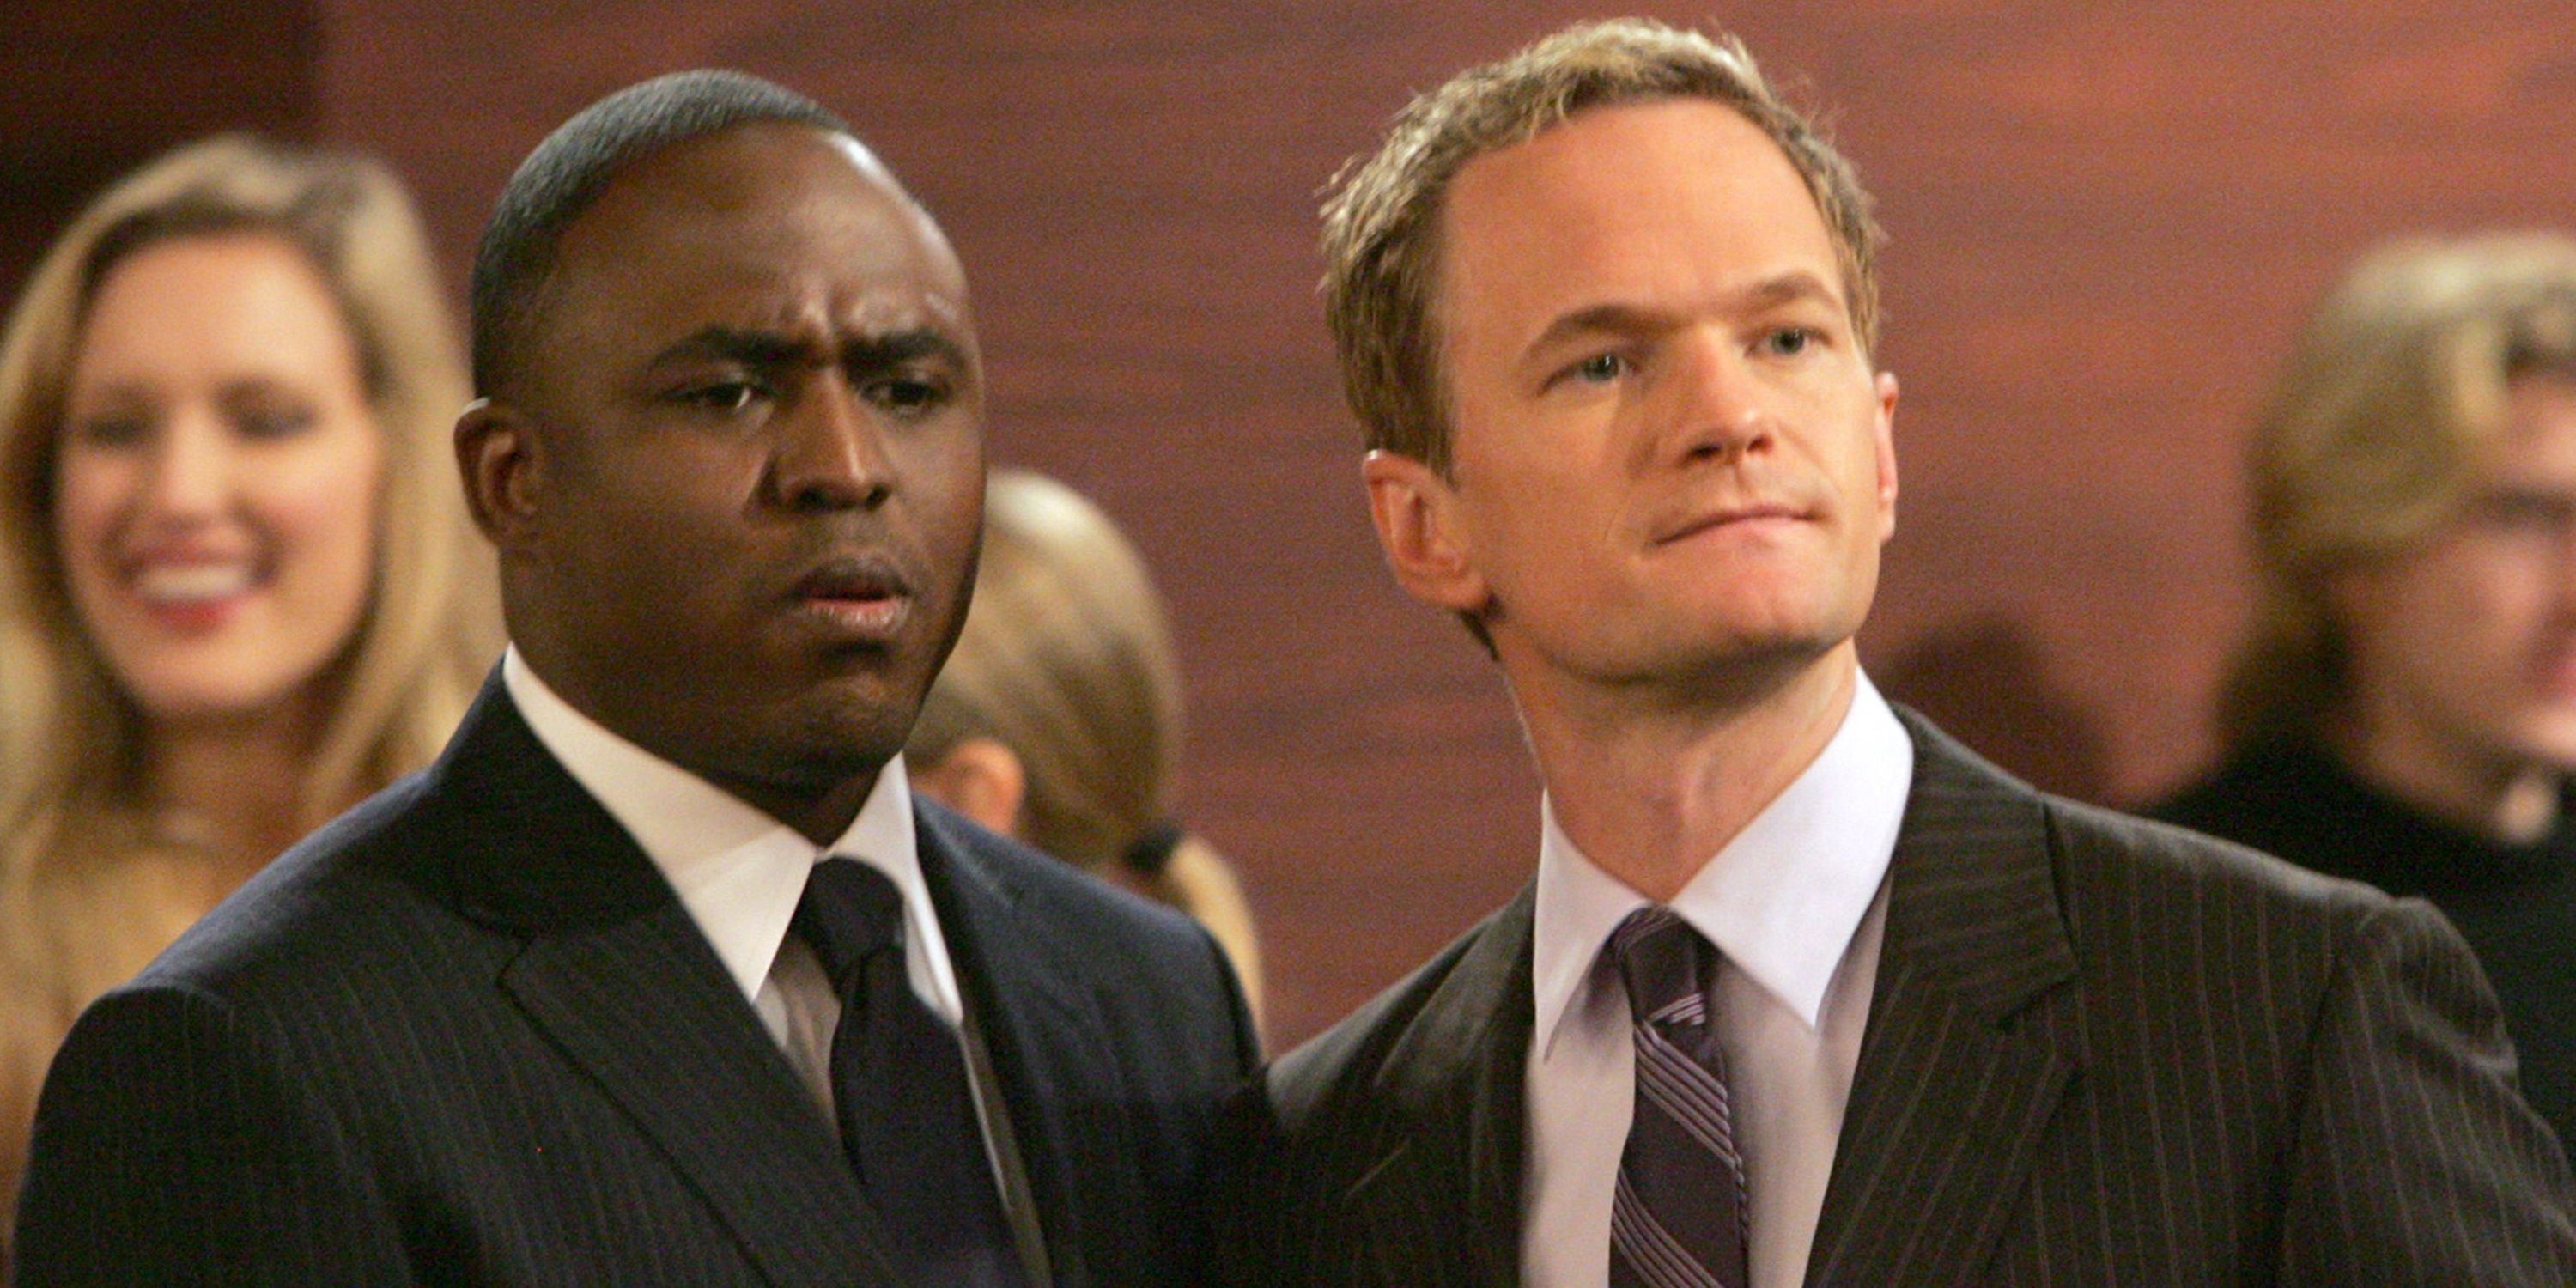 James and Barney Stinson wearing suits in HIMYM